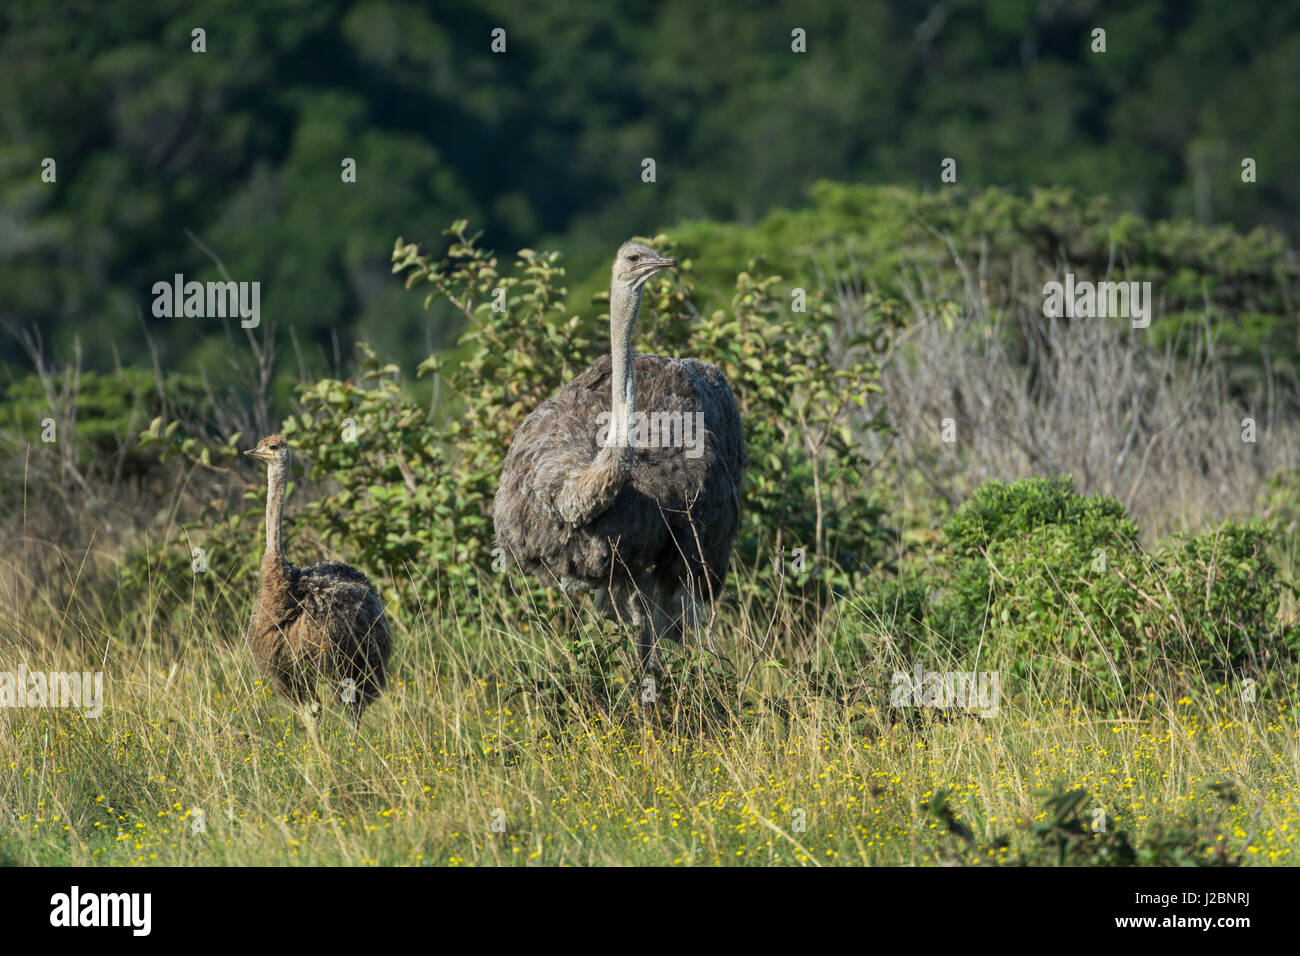 South Africa, Eastern Cape, East London. Inkwenkwezi Game Reserve. Female with baby ostrich (Struthio camelus) in grassland habitat. Stock Photo